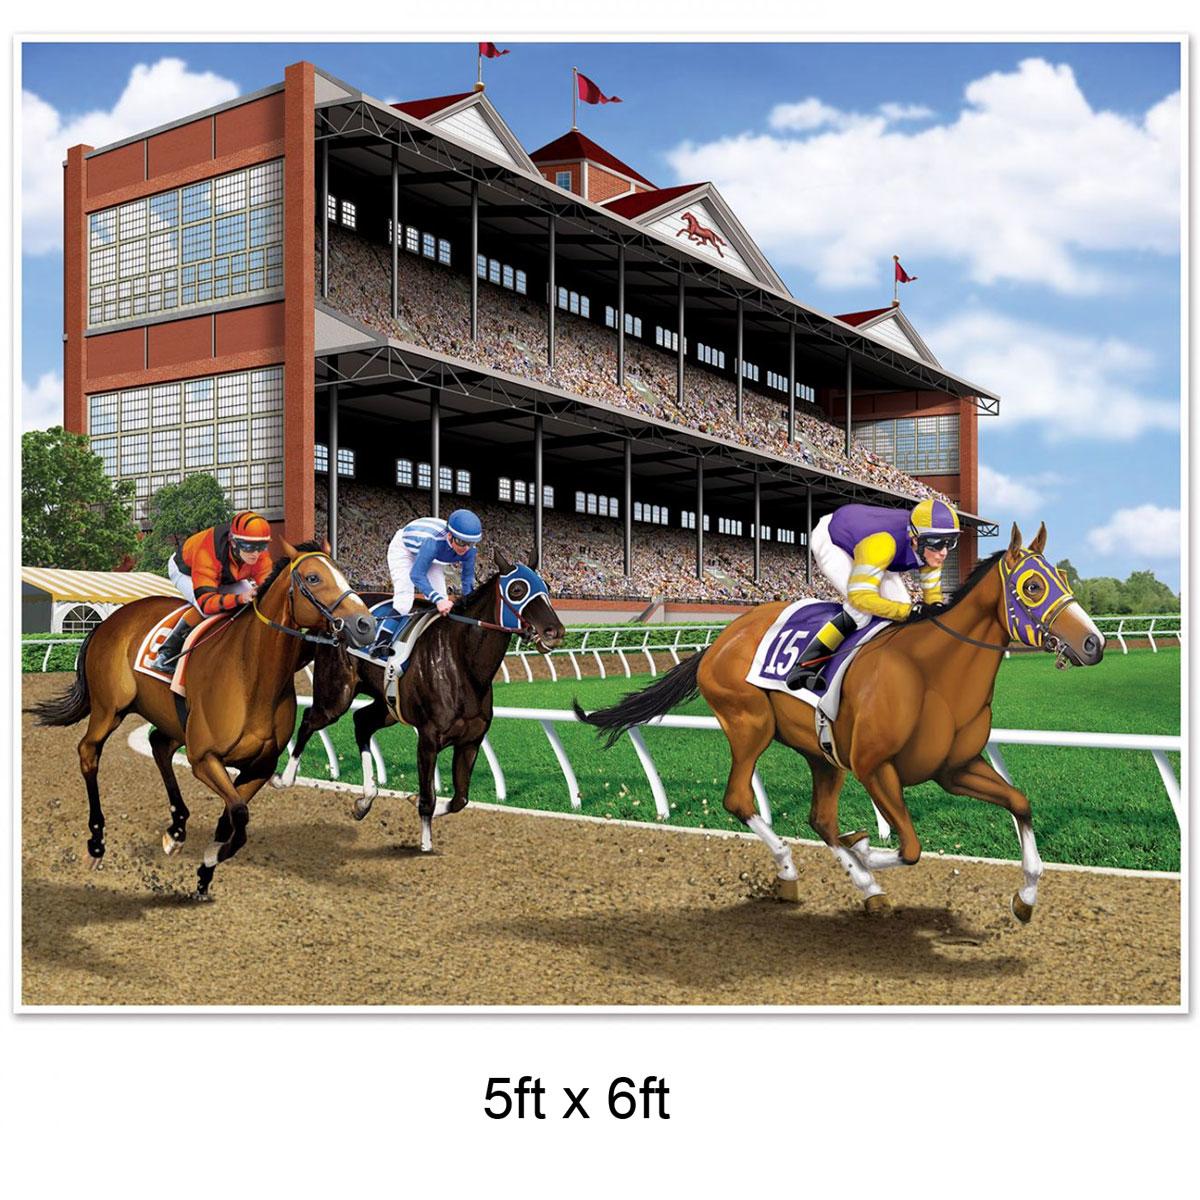 Horse Racing Insta-Mural - 5ft x 6ft by Beistle 53605 available in the UK here at Karnival Costumes online party shop